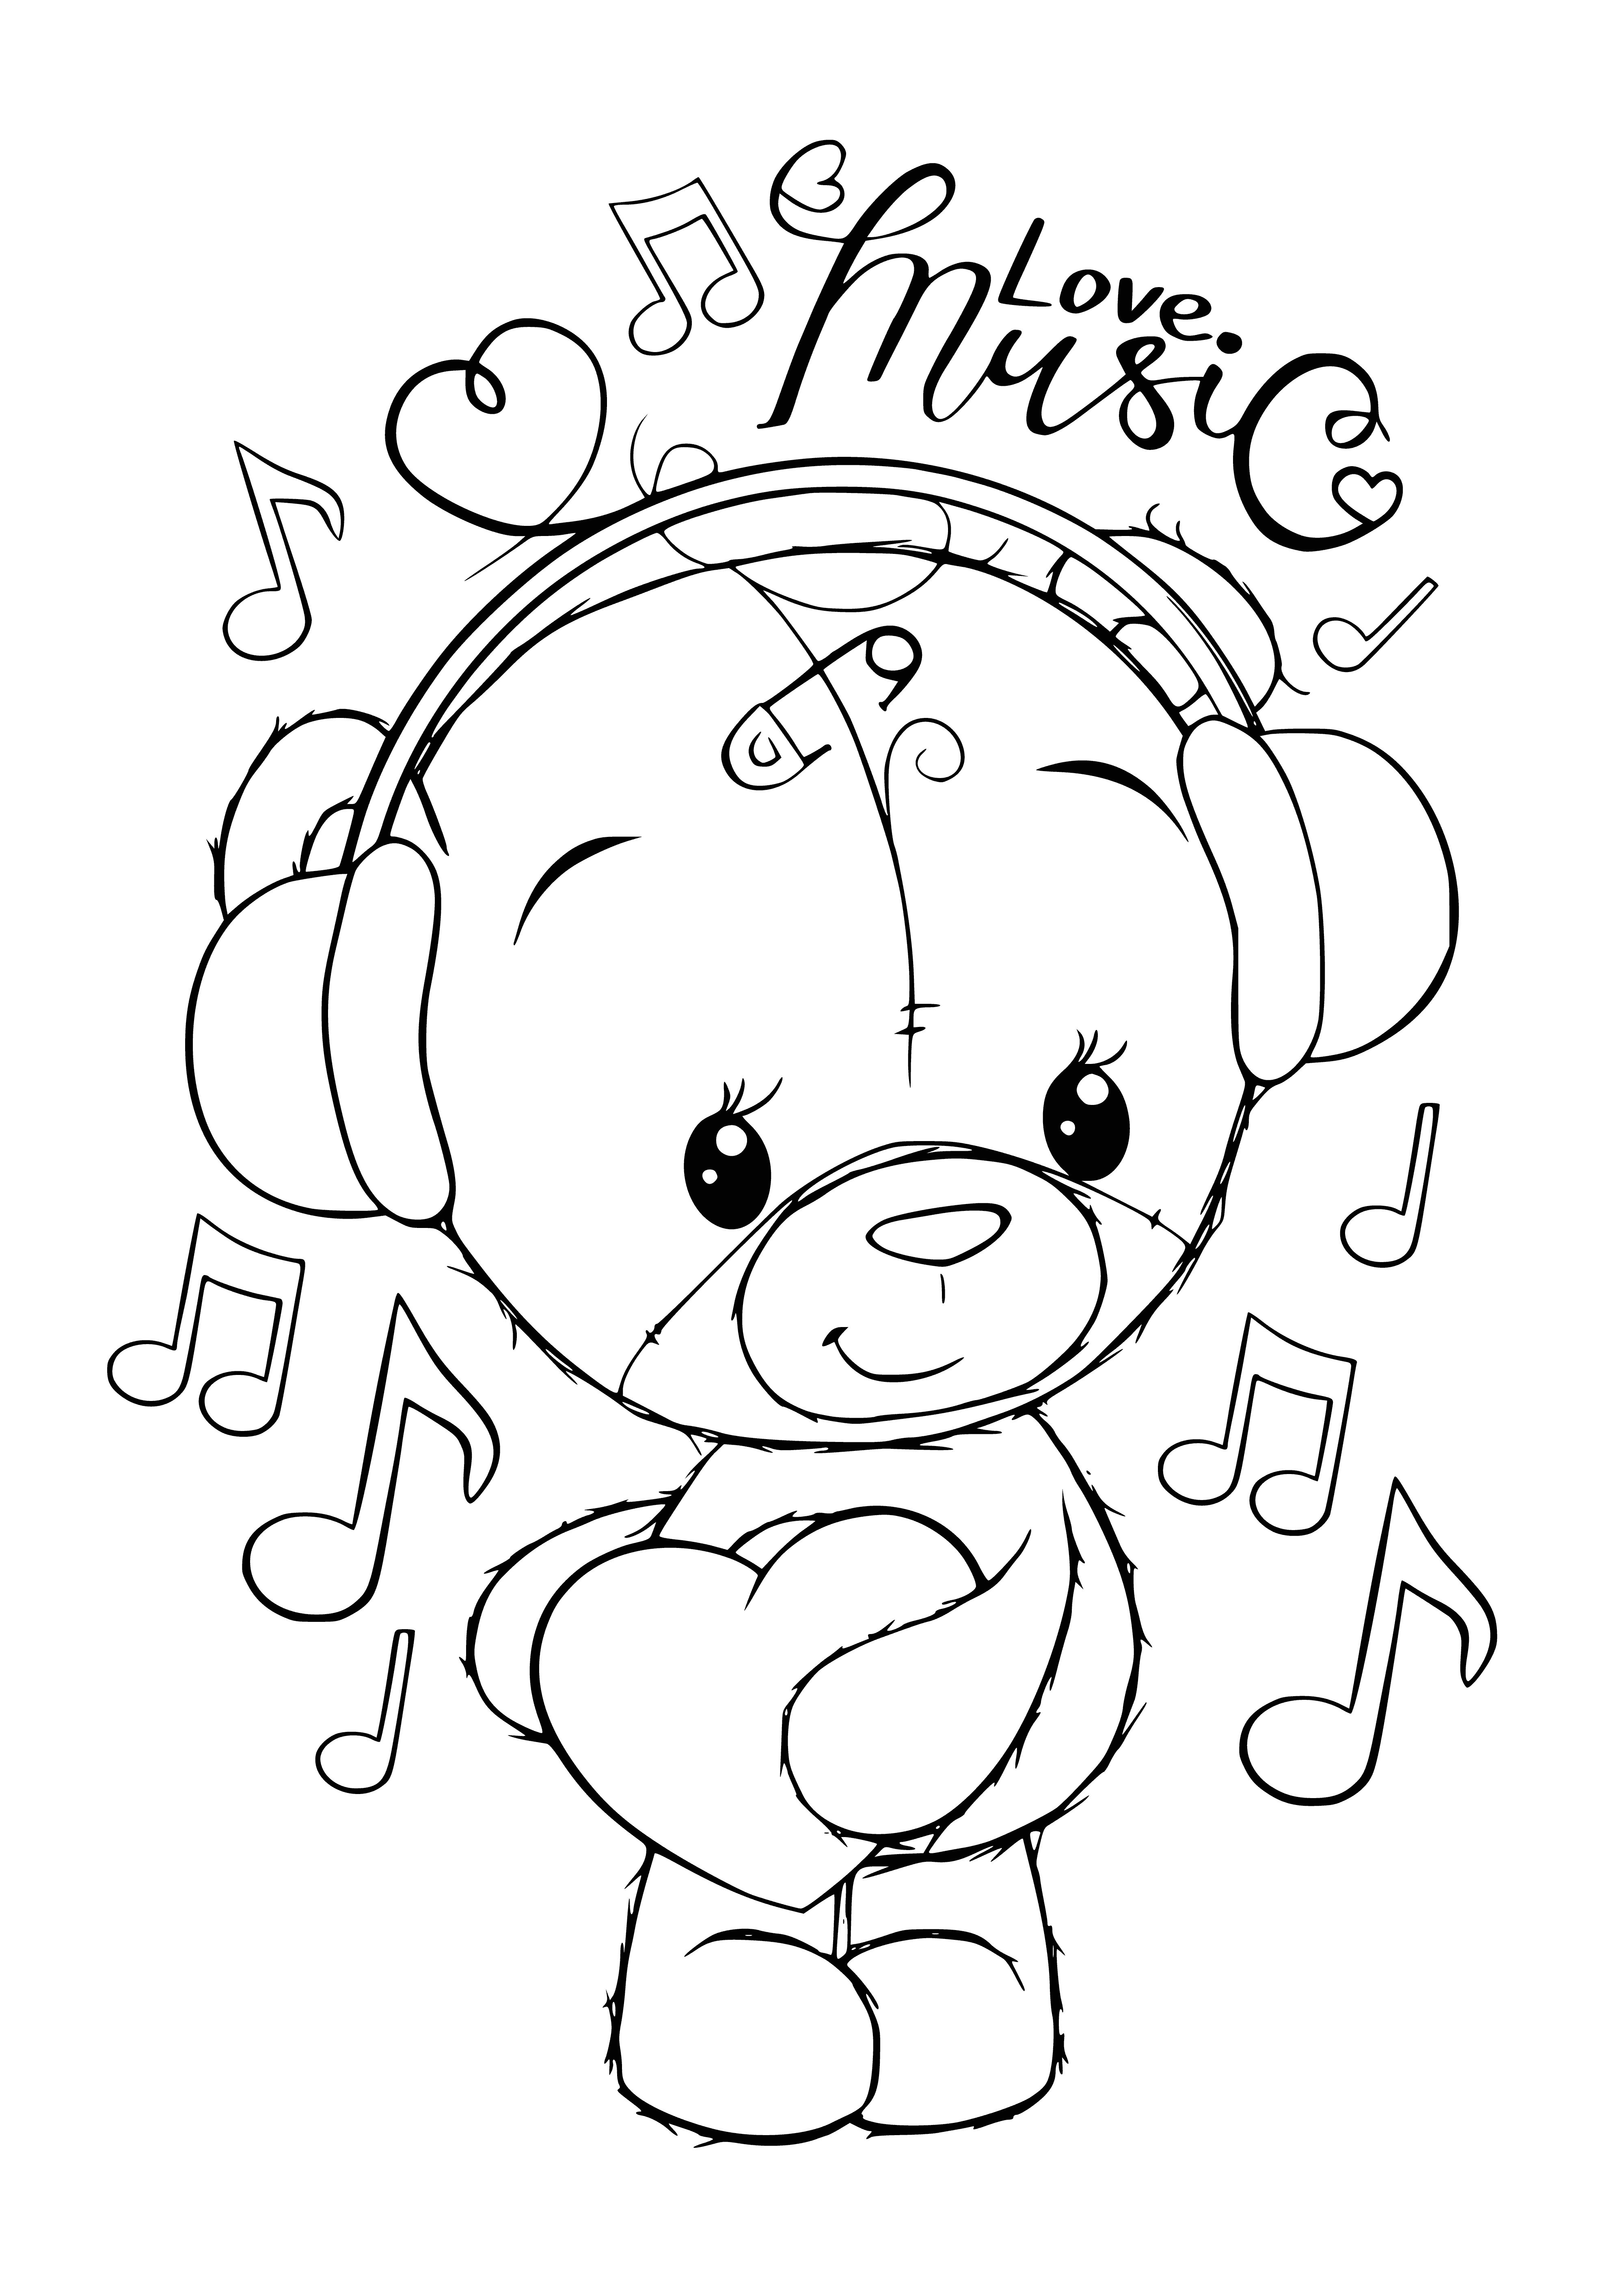 coloring page: Teddy bear w/ giant heart - perfect coloring page to show someone your love! #Kawaii #Coloring #Love